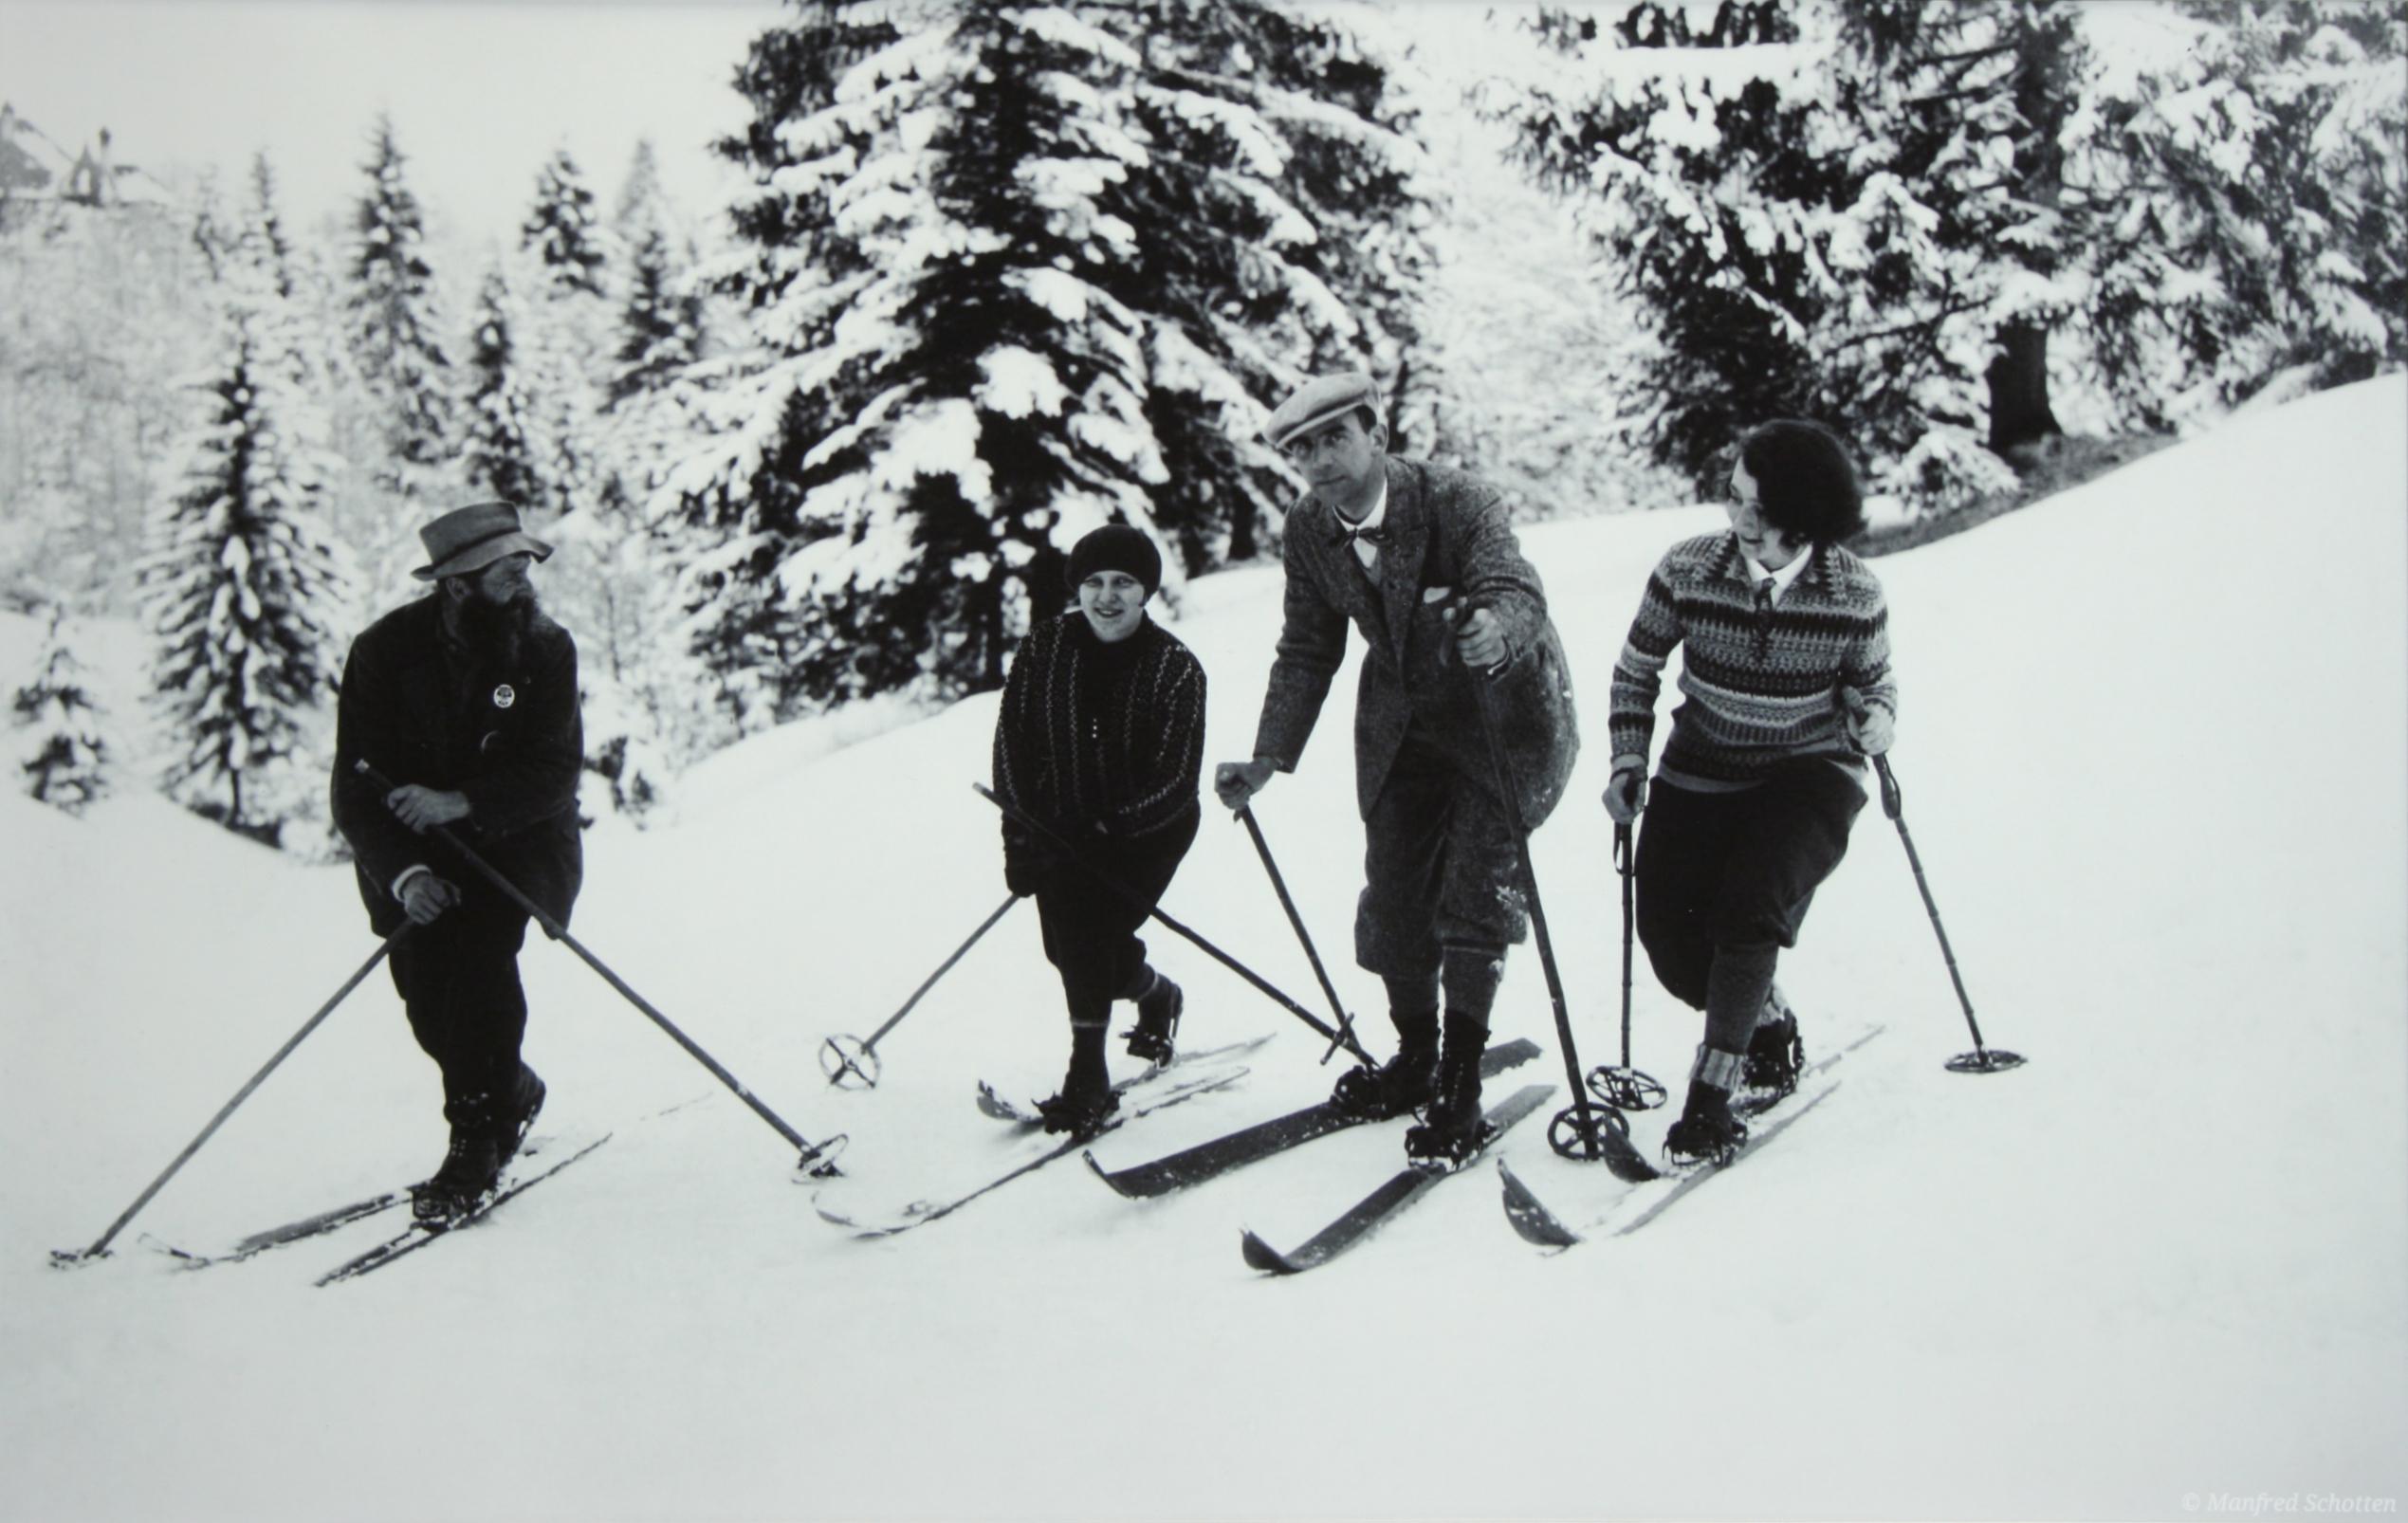 Alpine Ski photograph.
'BEND ZIE KNEES', a new mounted black and white photographic image after an original 1930s skiing photograph. Black and white alpine photos are the perfect addition to any home or ski lodge, so please do check out our other